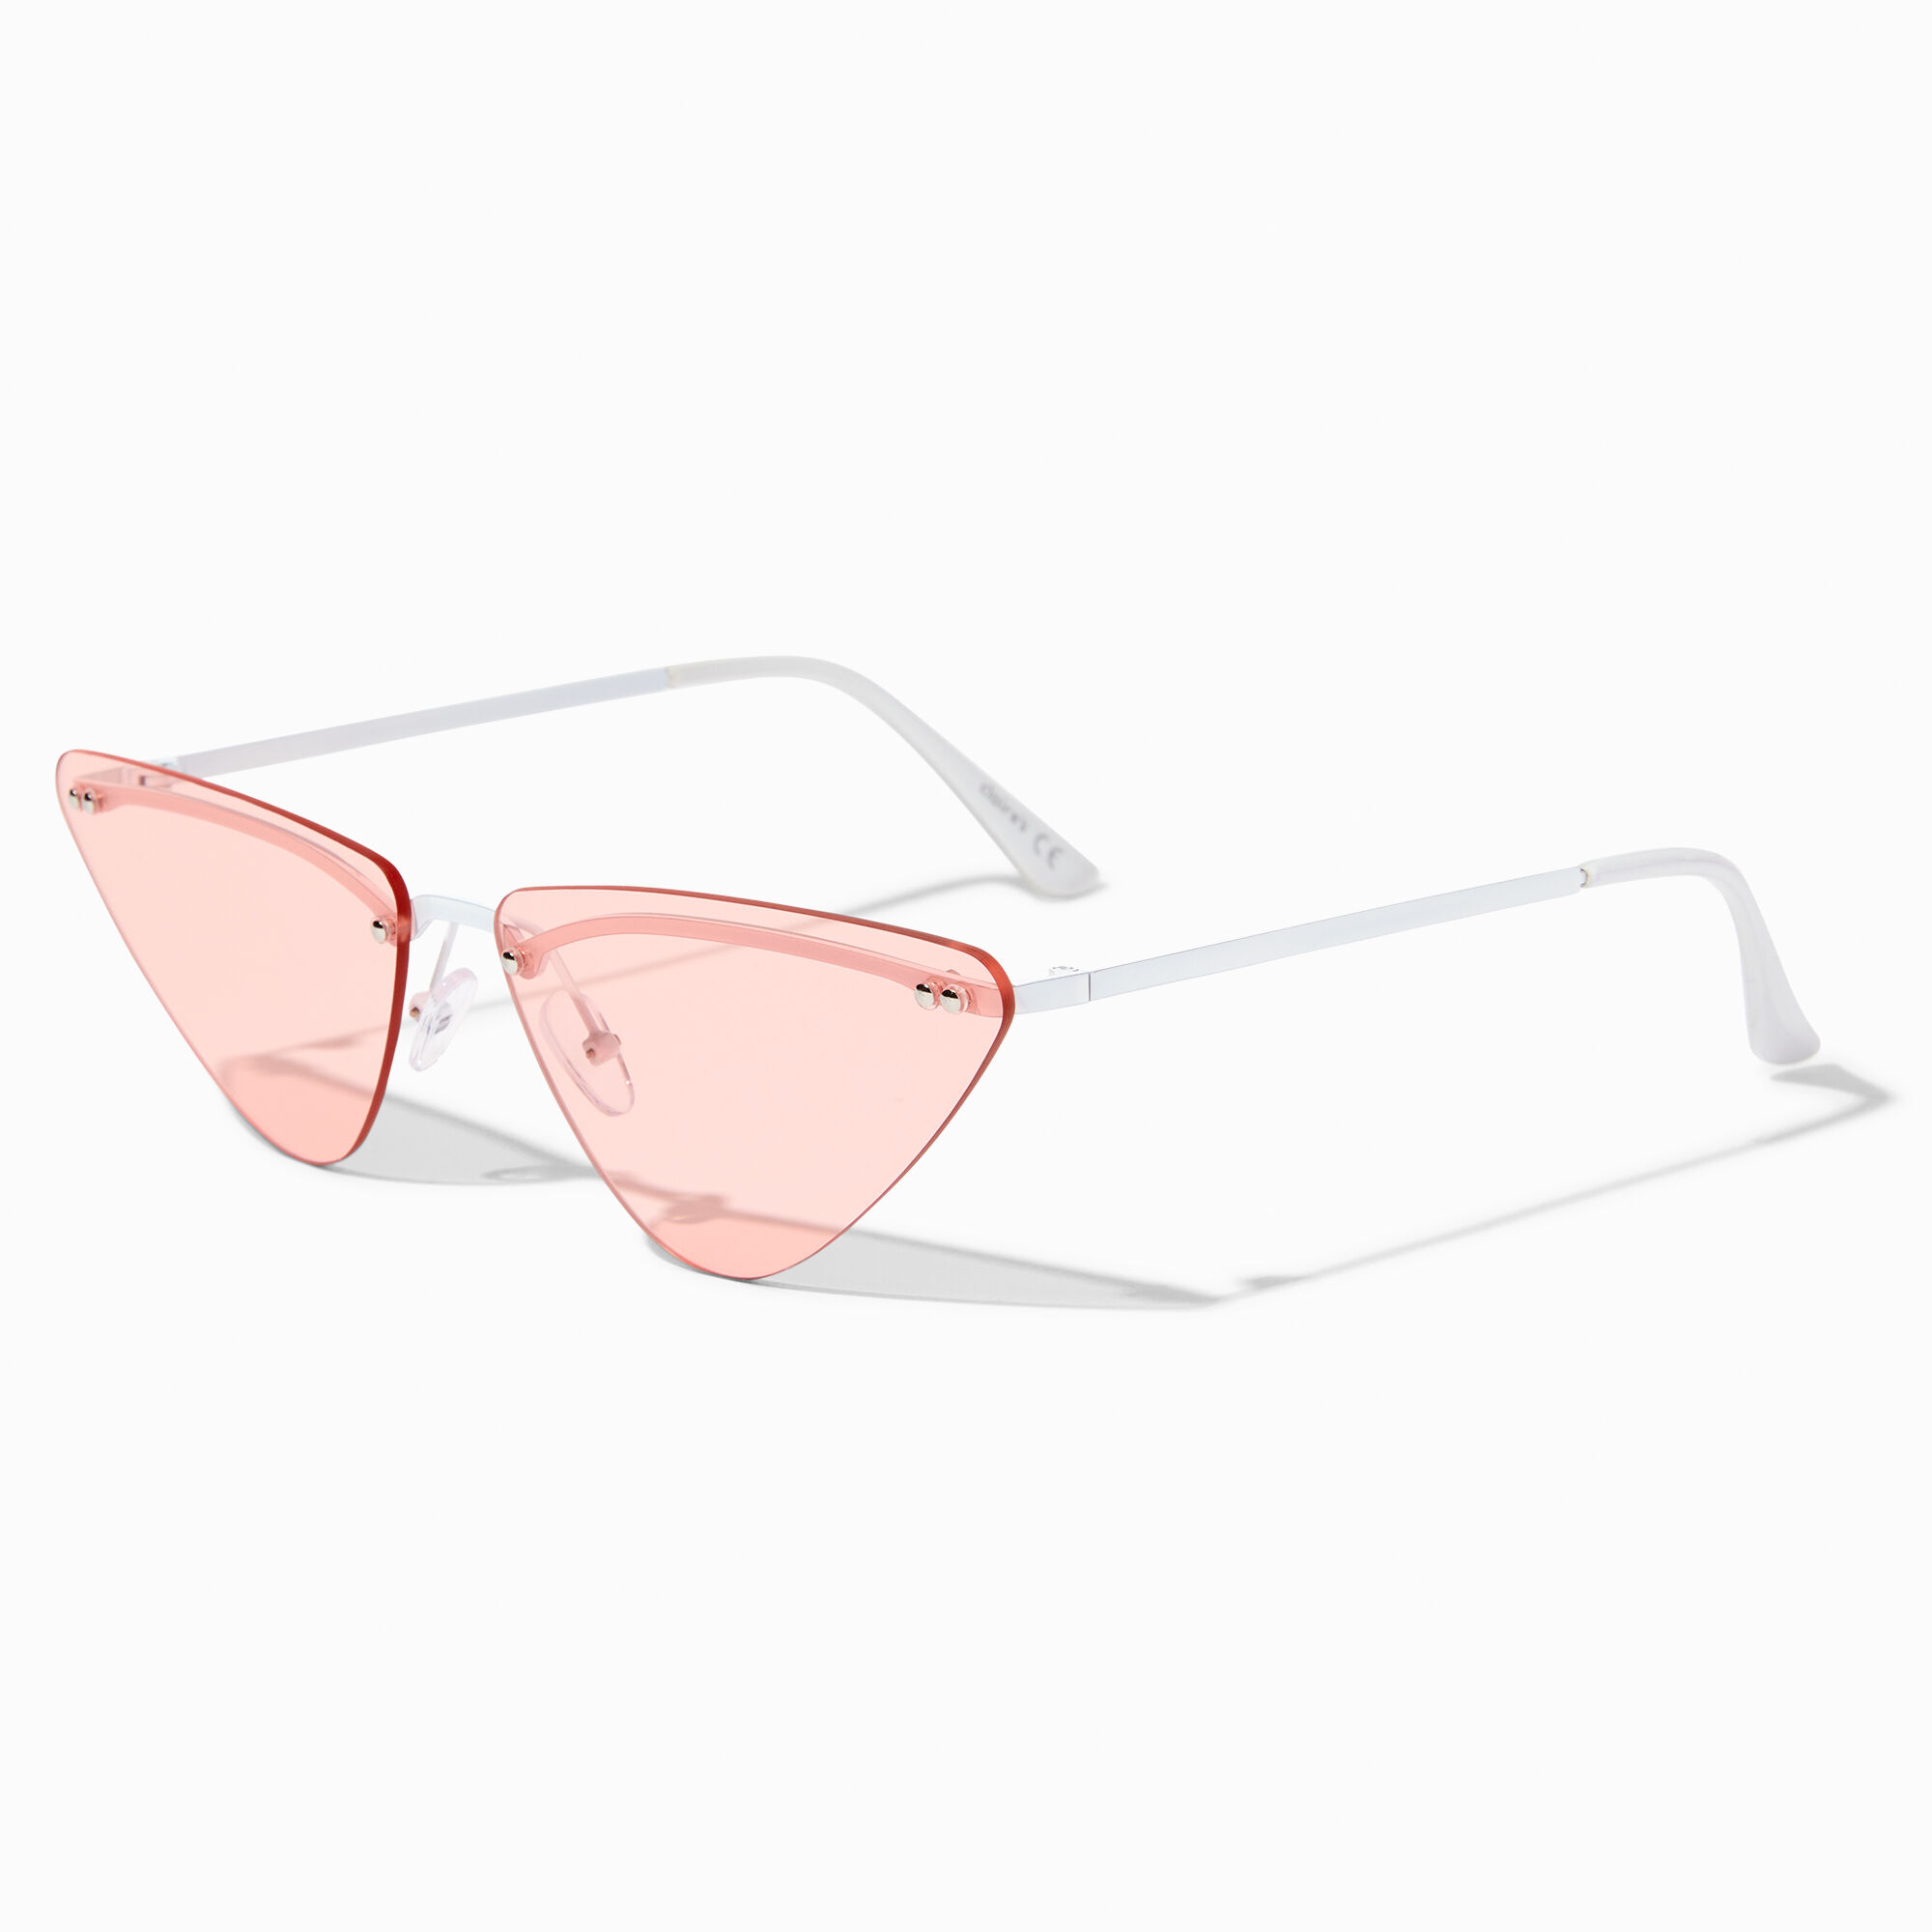 View Claires Triangle Sunglasses Pink information